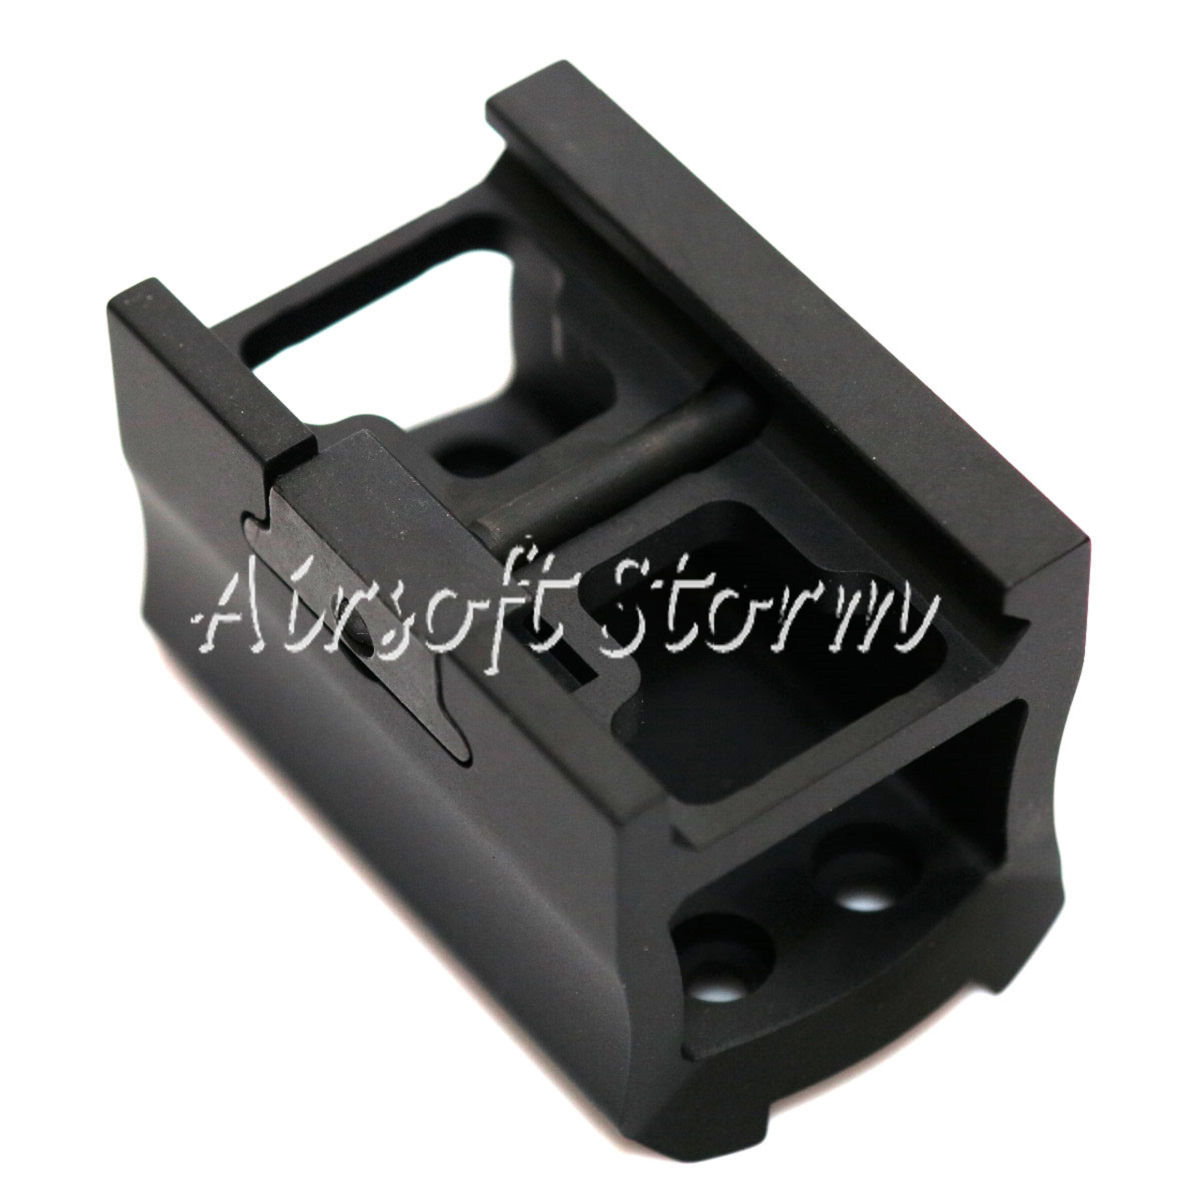 HOLOSUN HG-403G-MM Scope Mount for Holosun HG-403 Dot Sight Scope - Click Image to Close